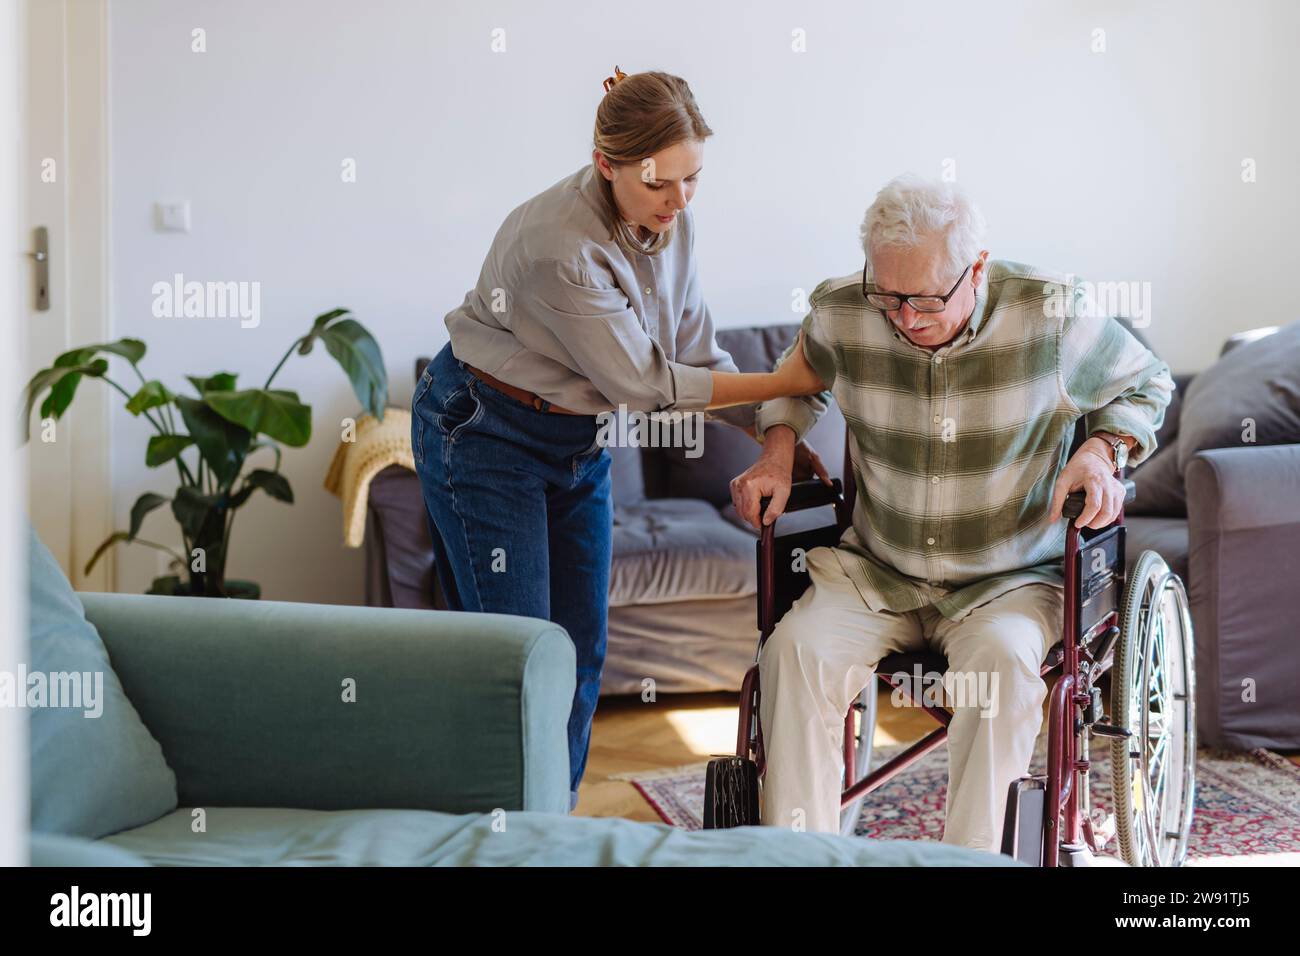 Healthcare worker helping senior man sitting in wheelchair at home Stock Photo